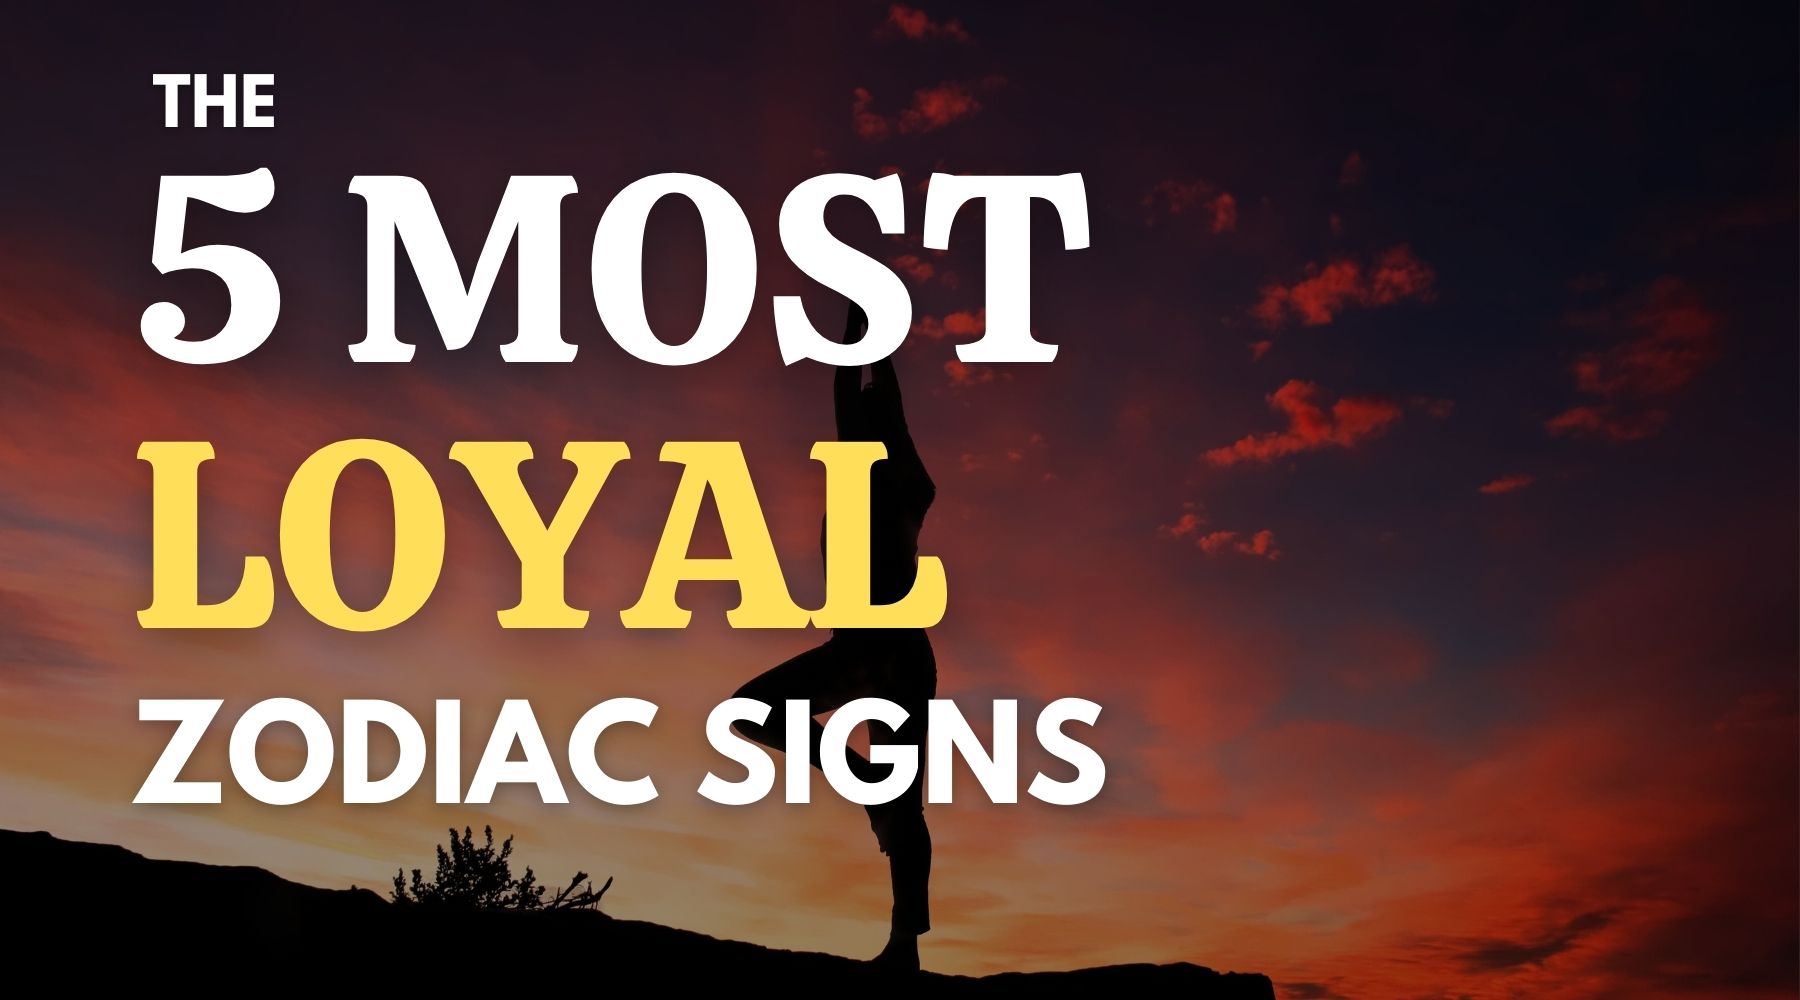 The 5 most loyal zodiac signs - They will never leave your side